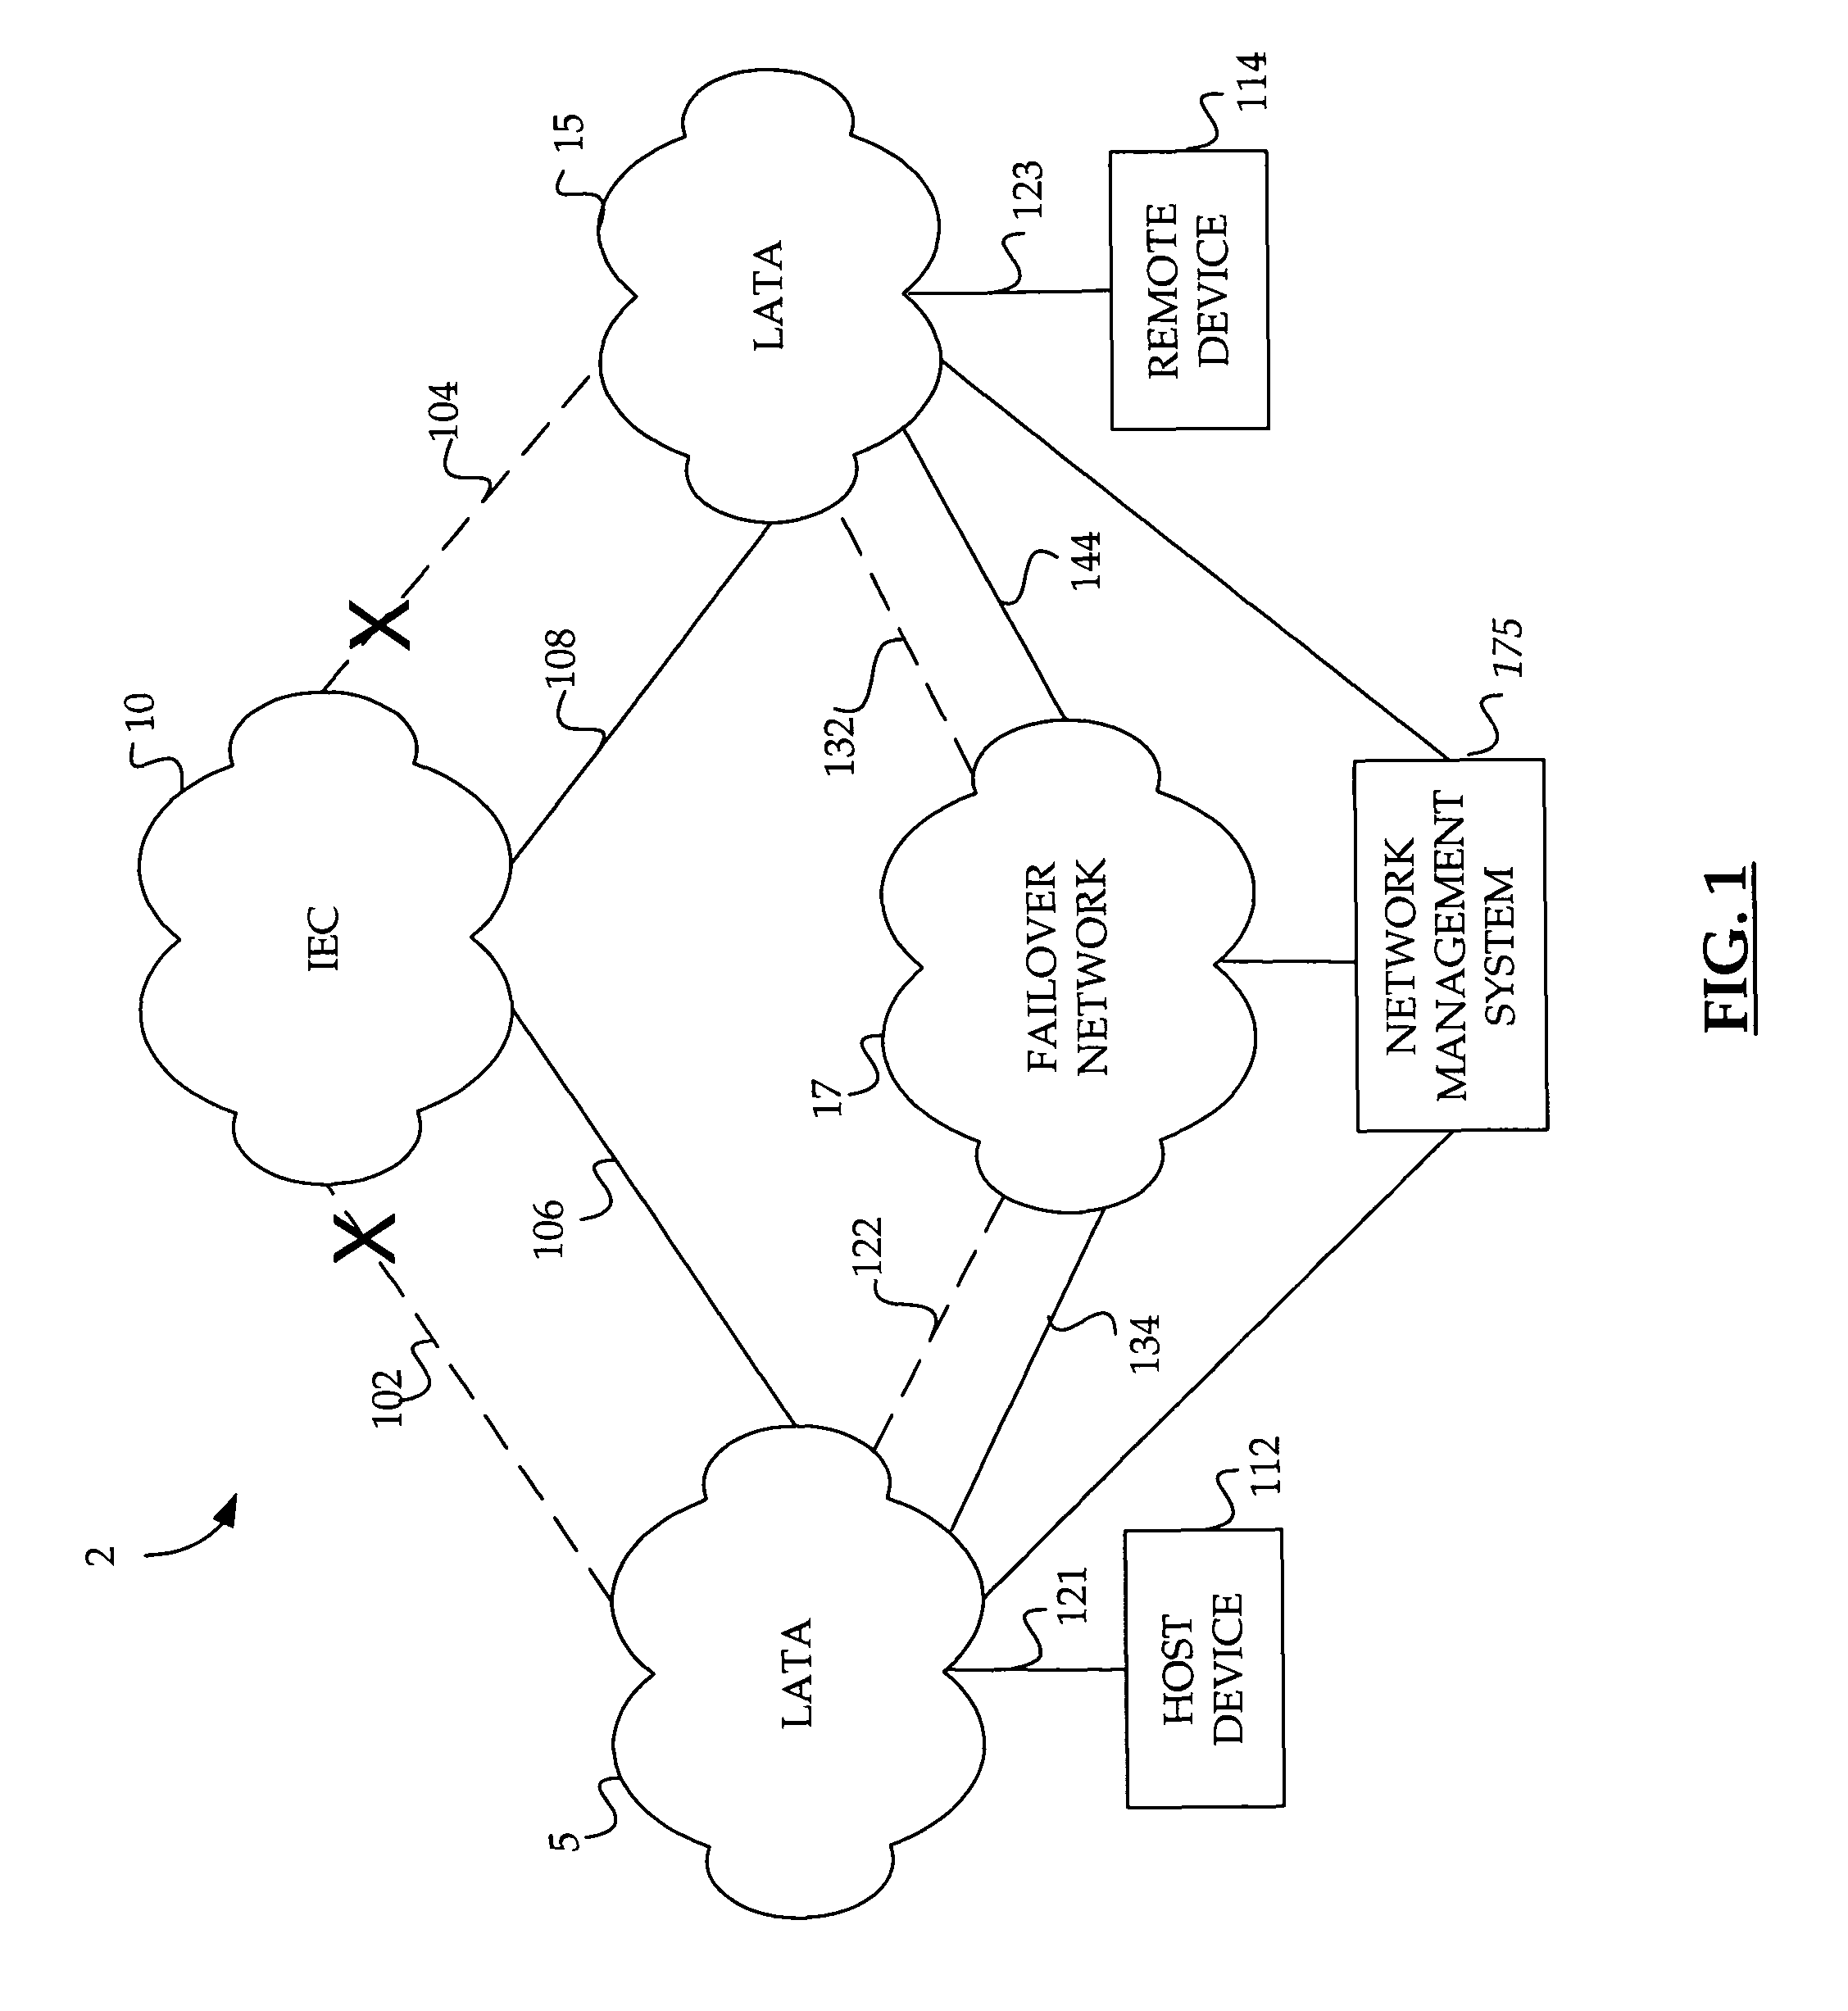 Method and system for automatically rerouting logical circuit data in a data network